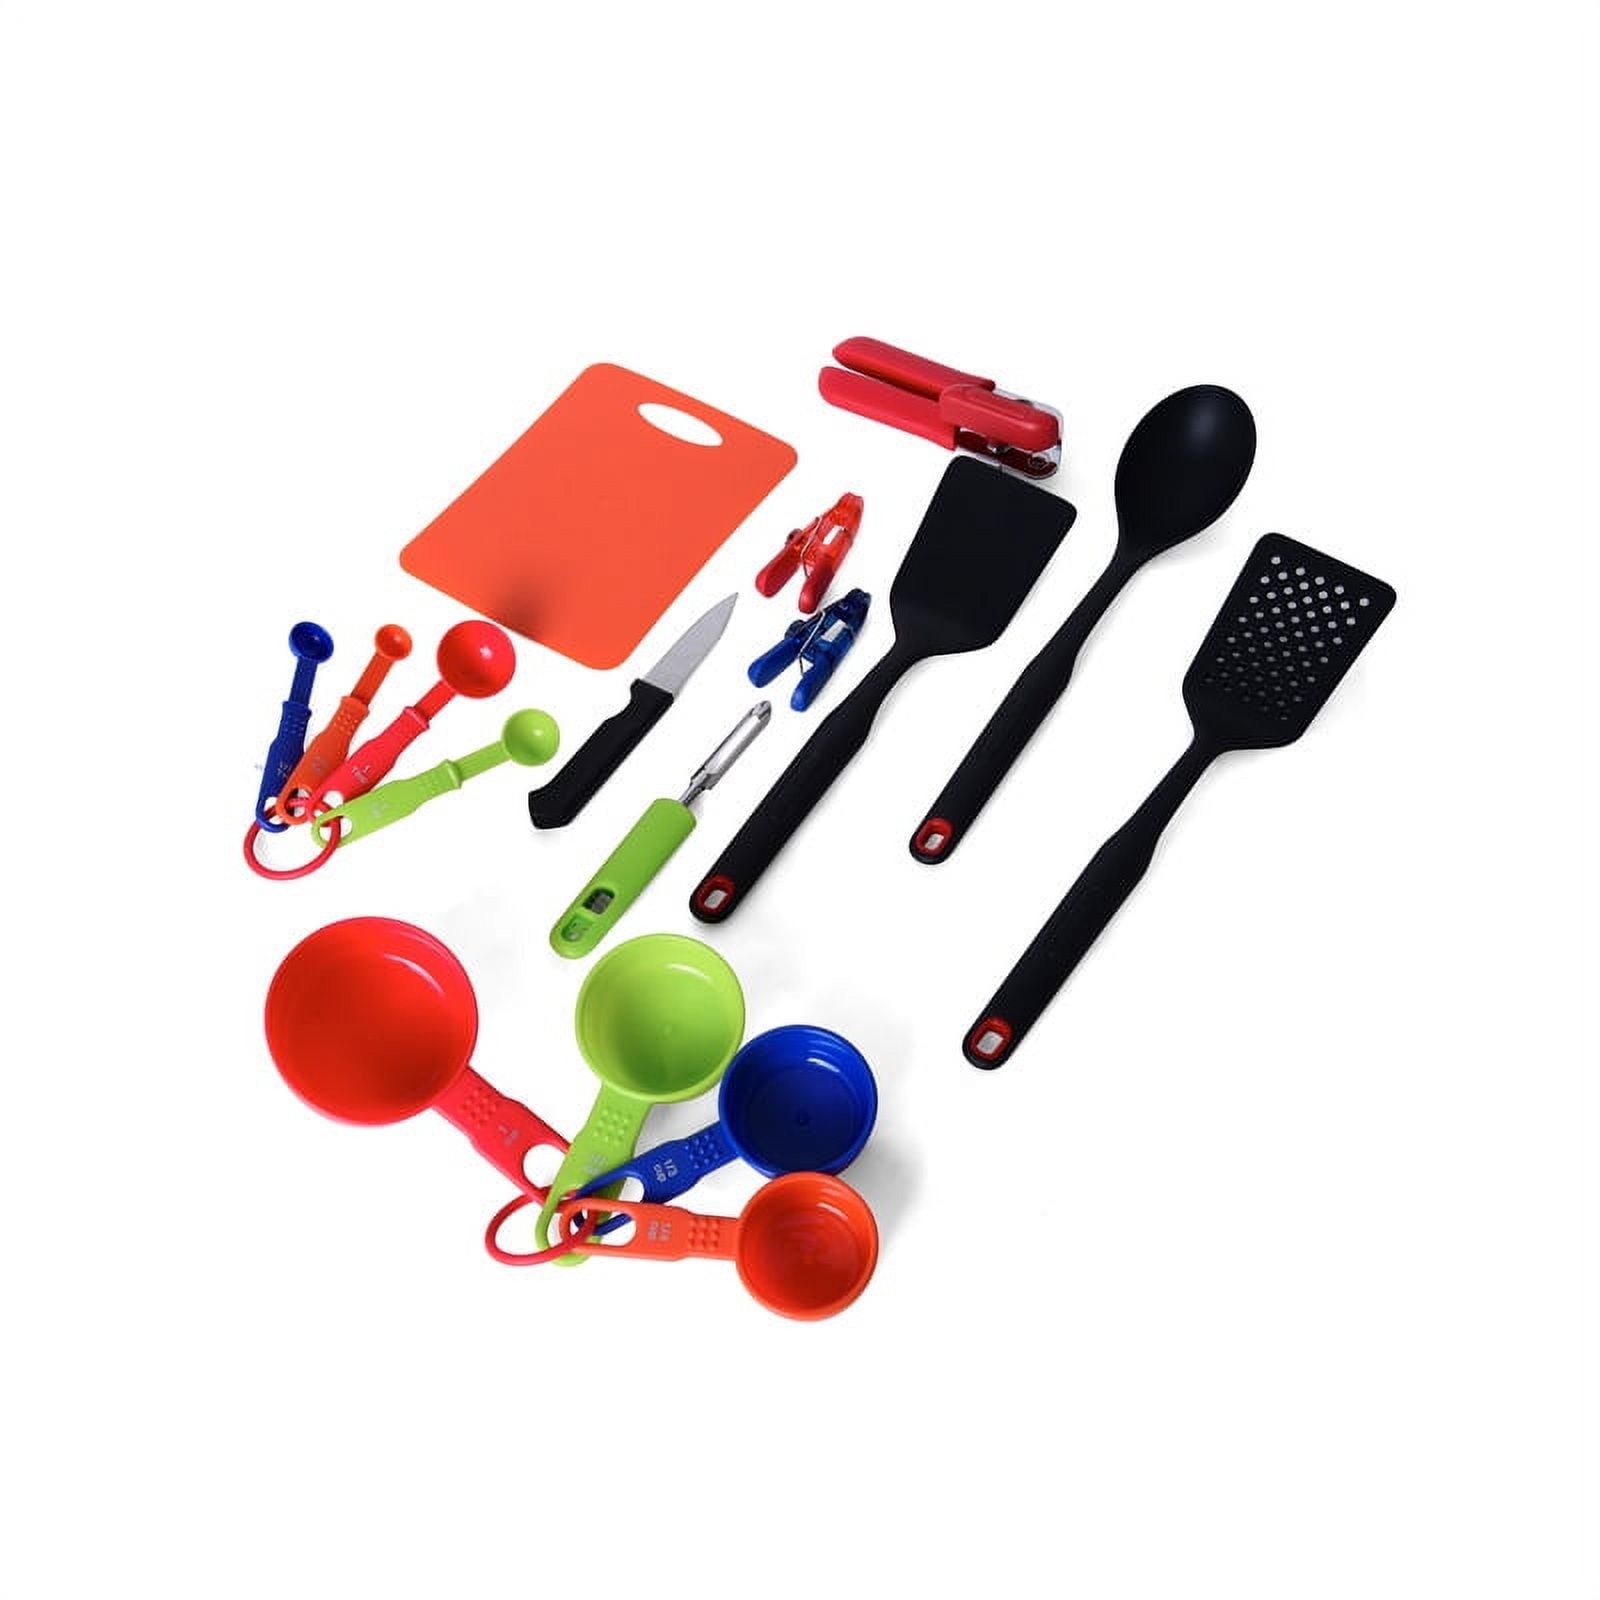 Classic Farberware Cookware 17-Piece Kitchen Tool and Gadget Set ✨NEW✨